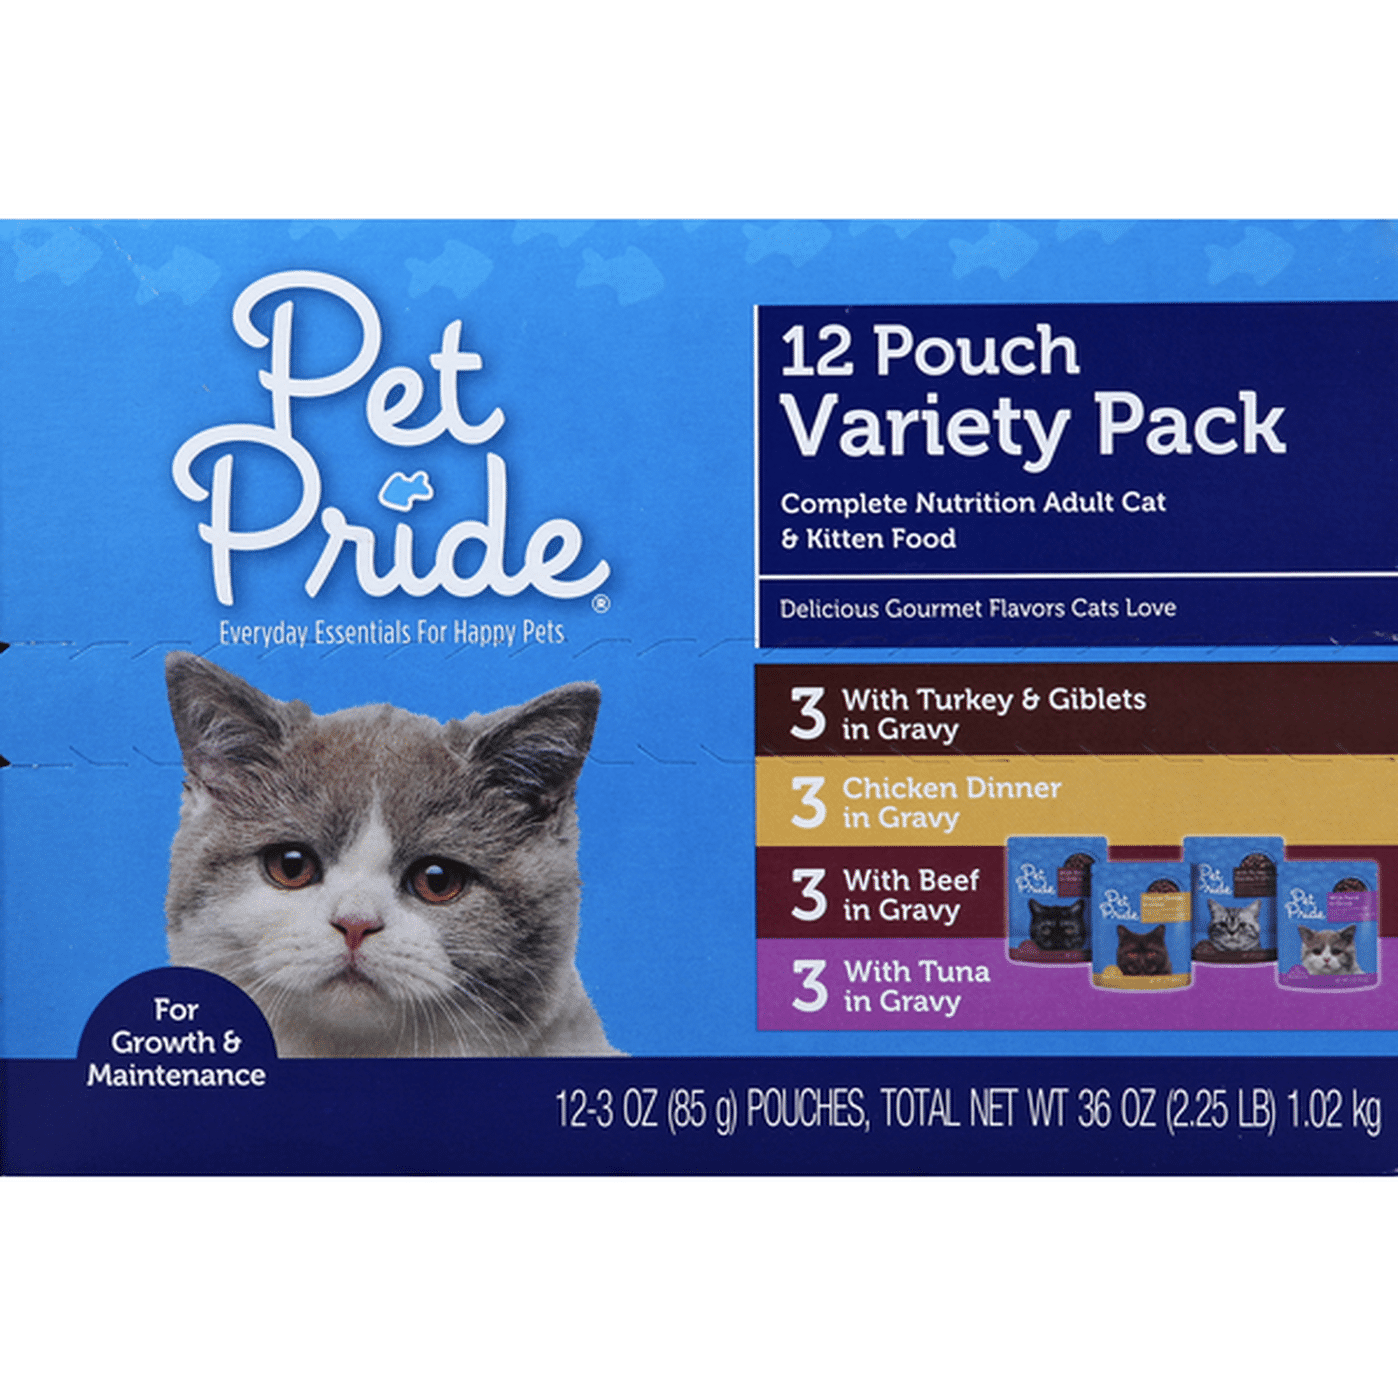 Pet Pride Cat & Kitten Food, Variety Pack, 12 Pouch (12 each) Delivery